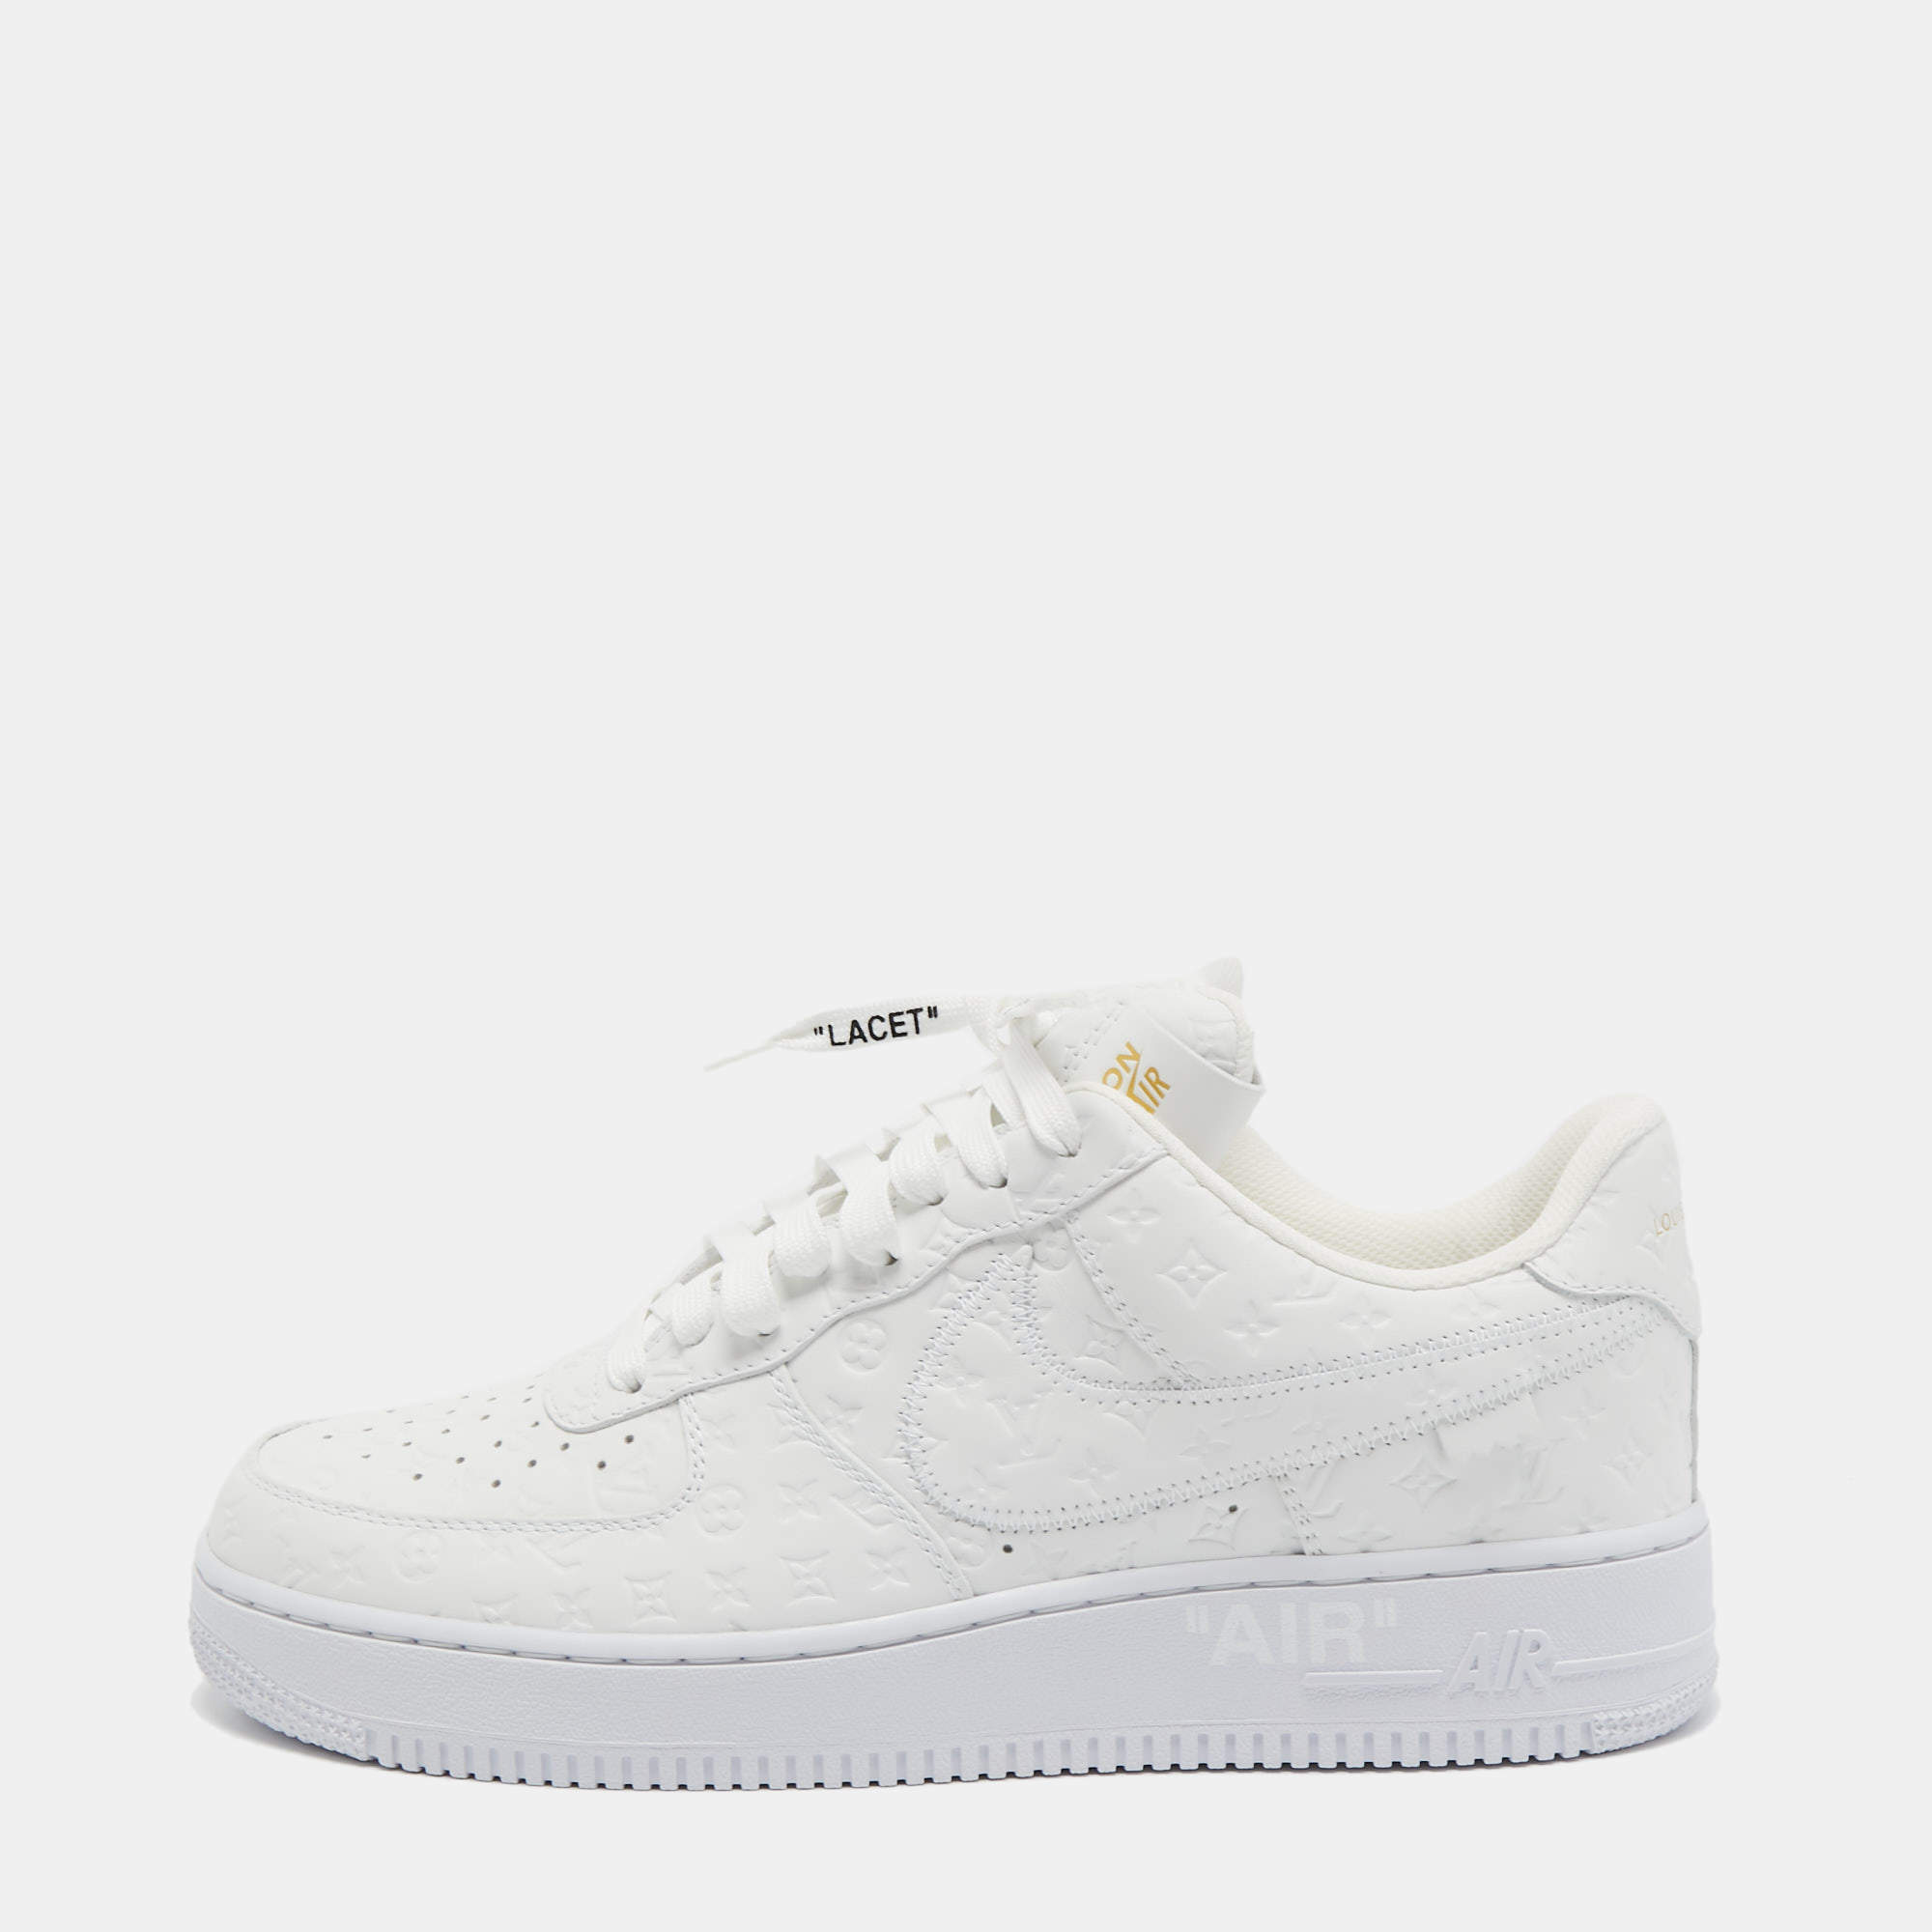 Louis Vuitton/Air Force  White Leather  Low Top Sneakers Size 43